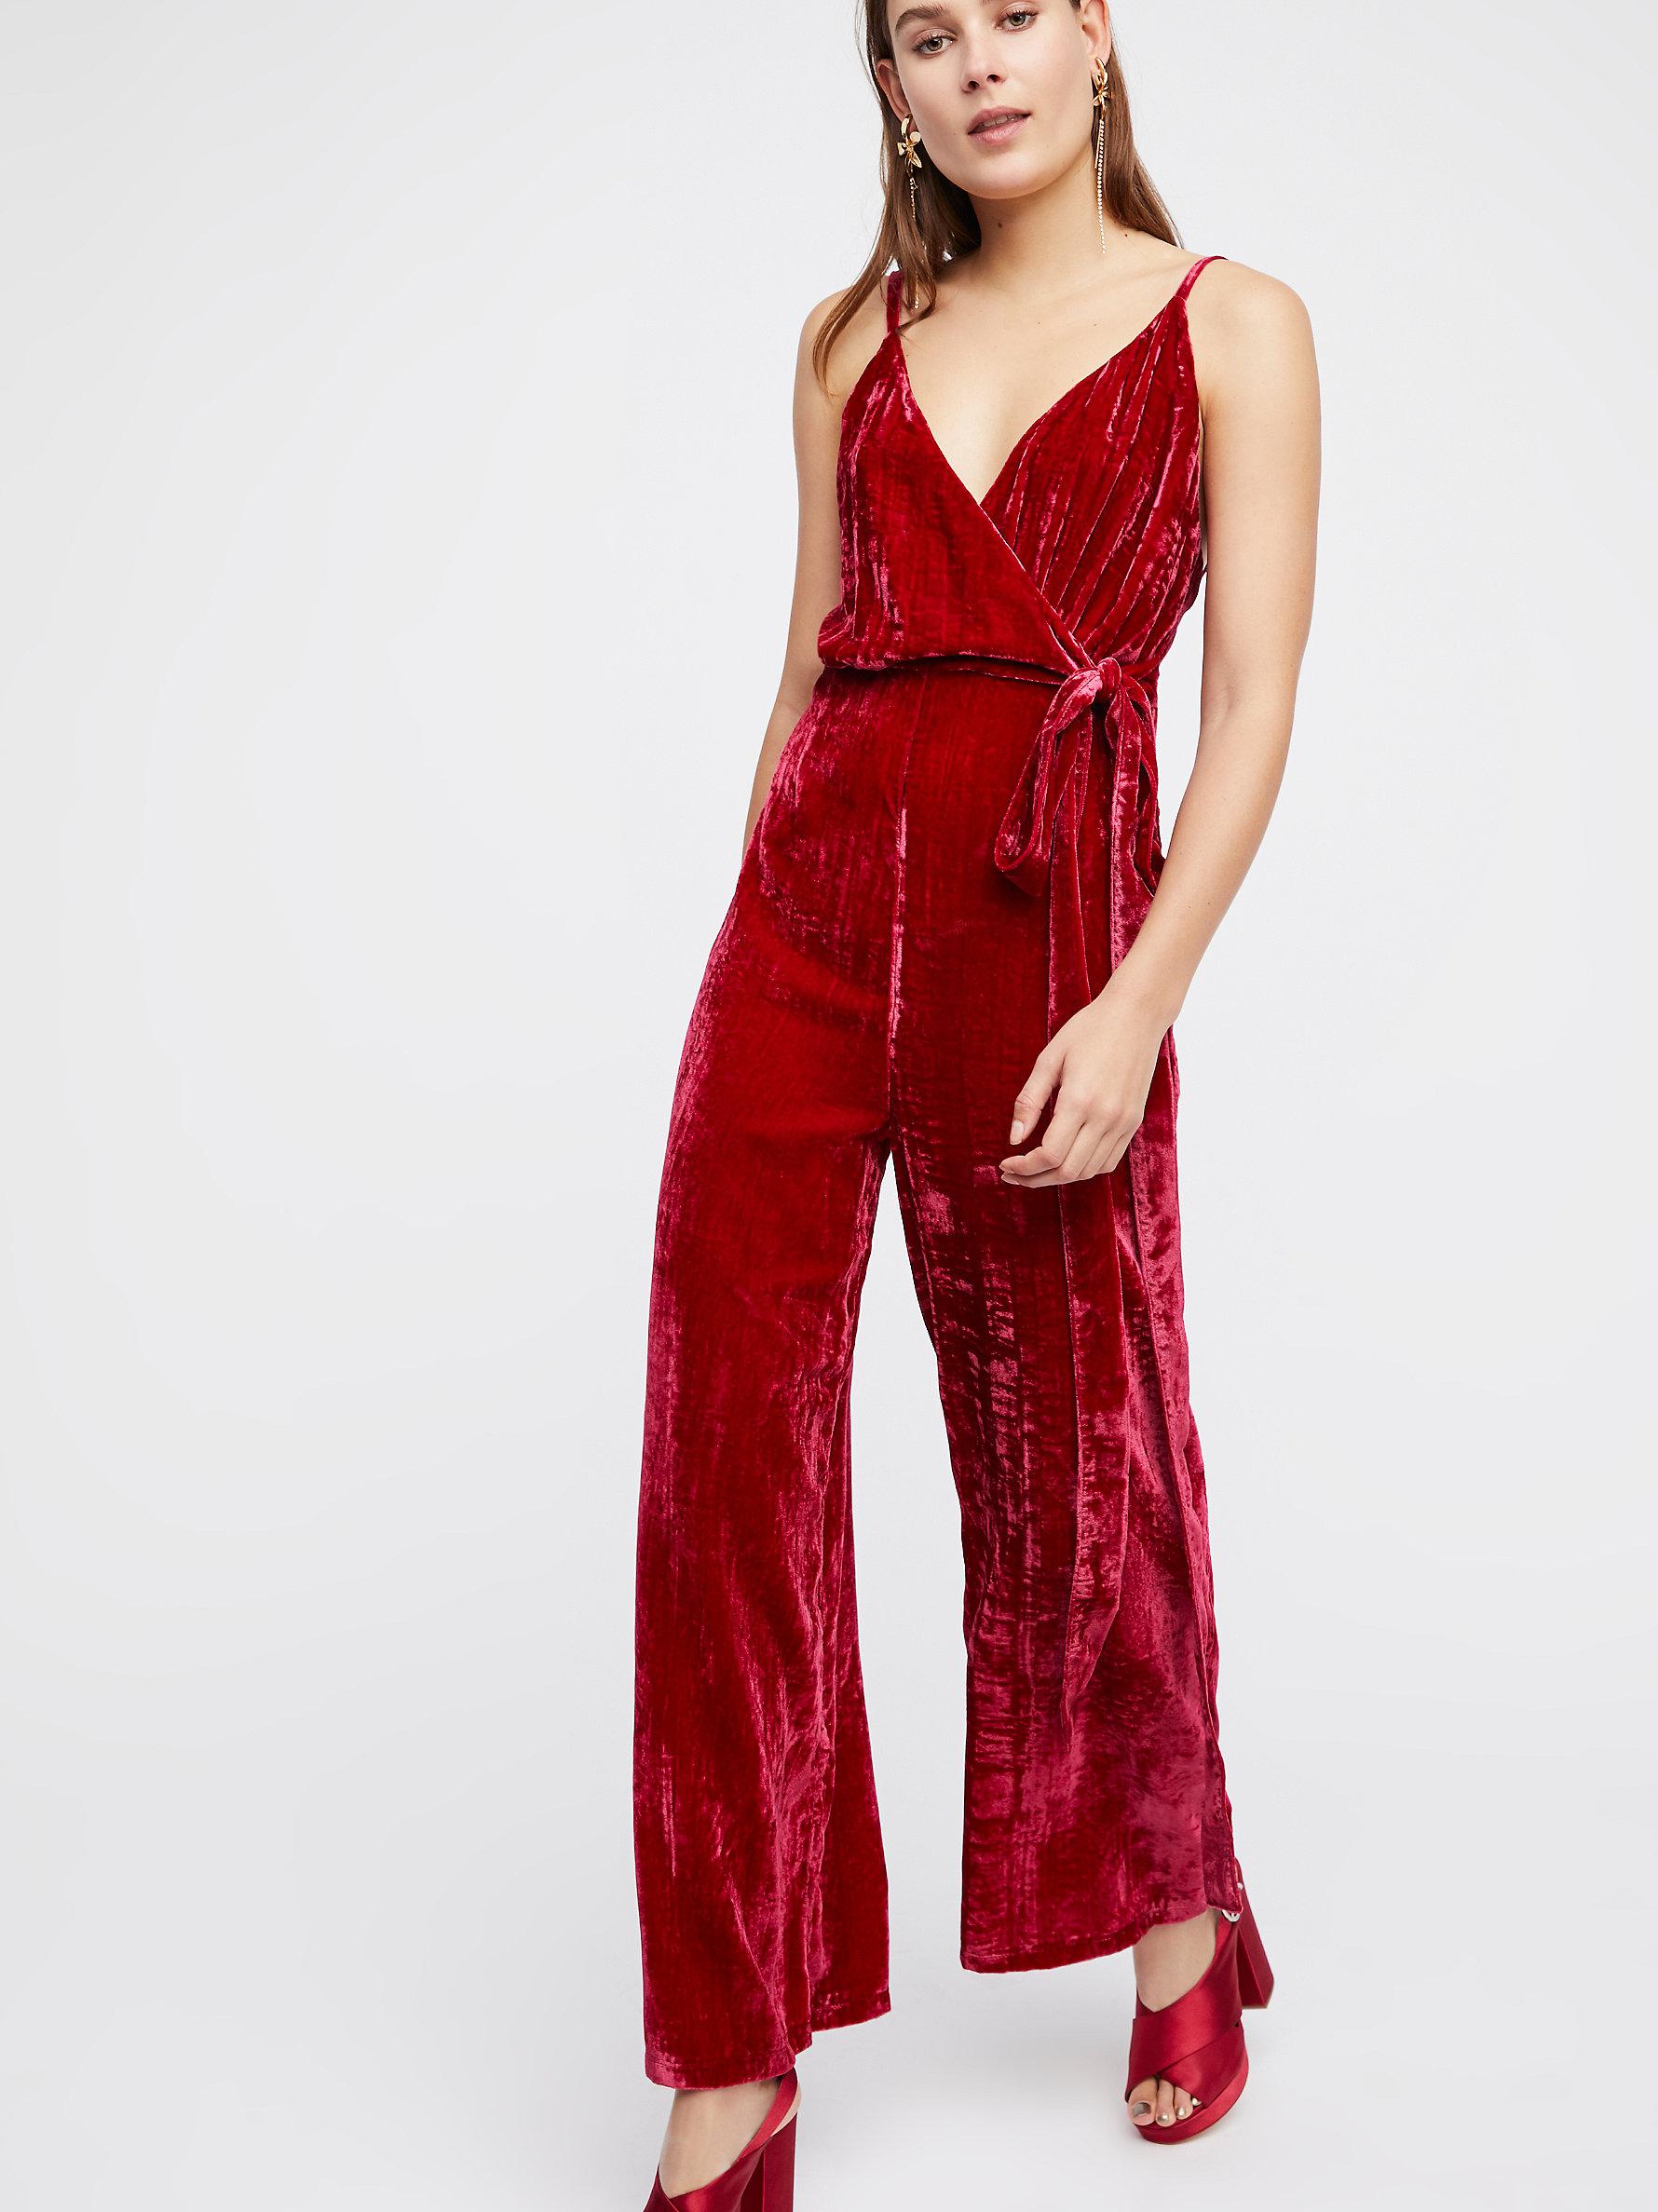 Free People Cabbage Rose Velvet Jumpsuit in Burgundy (Red) - Lyst